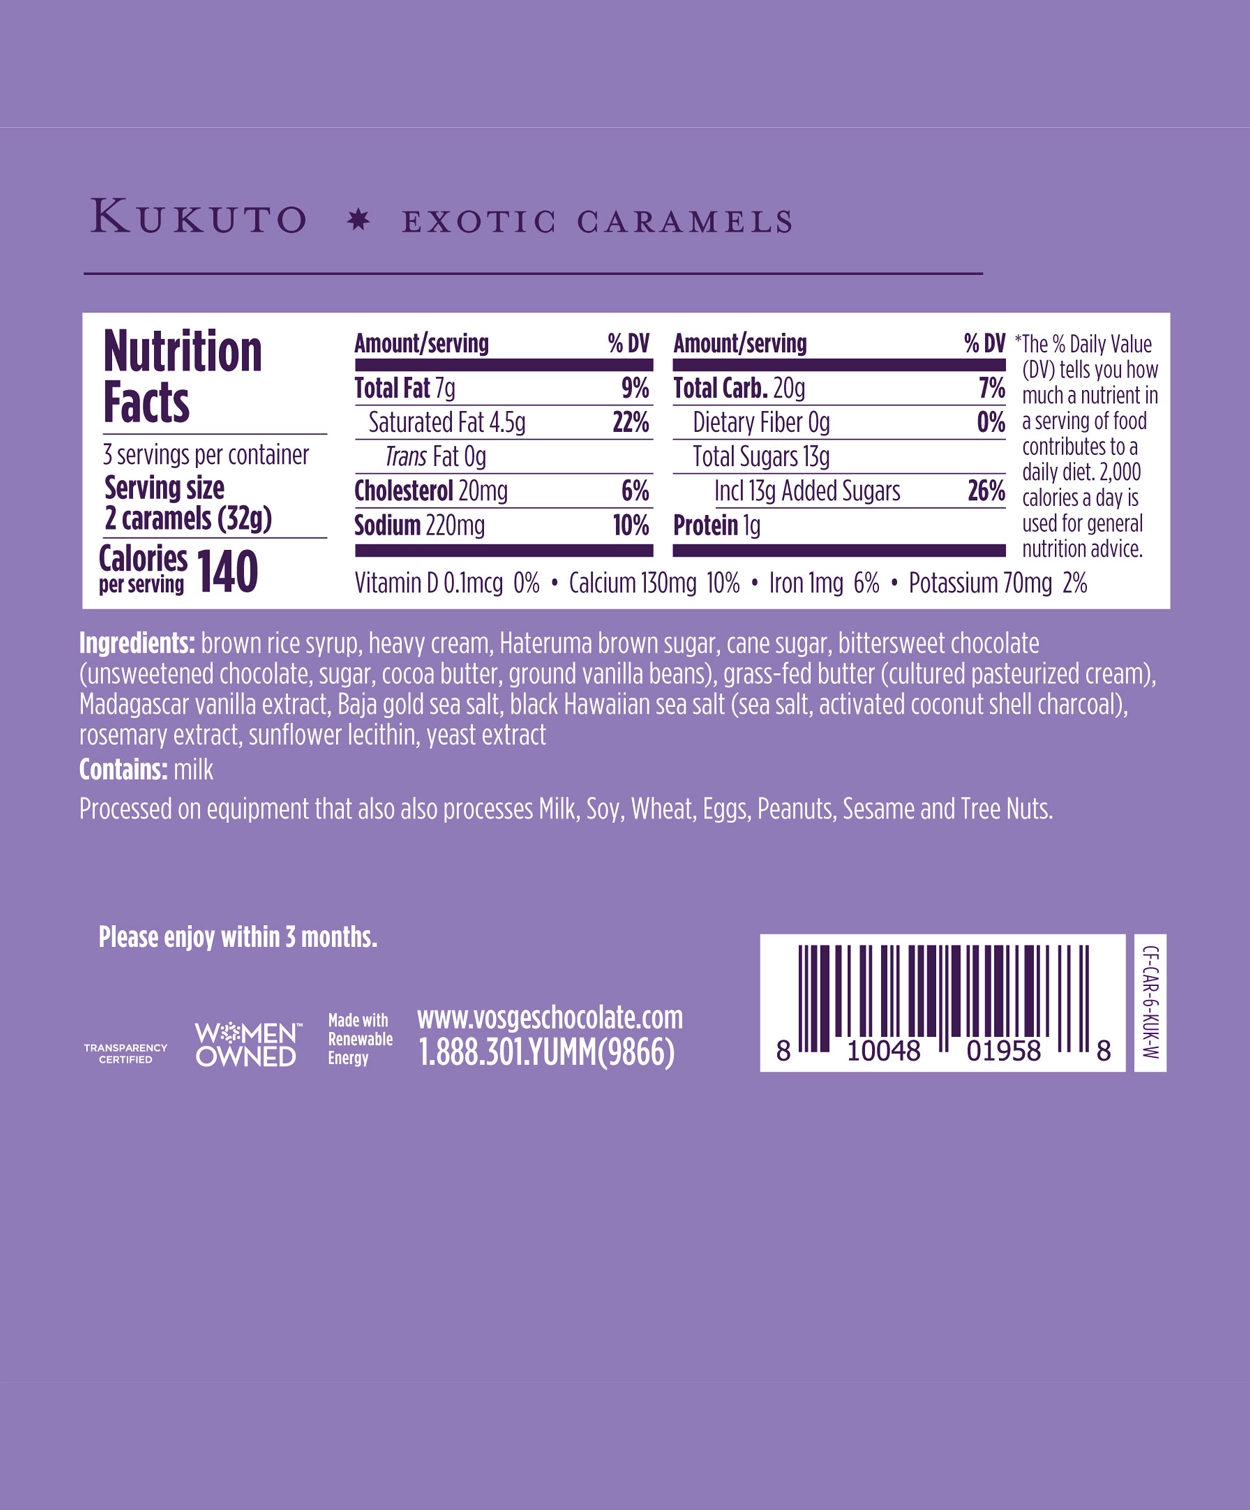 Nutrition Facts and Ingredients of Vosges Haut-Chocolat Kokuto black sugar Exotic Caramels in white, san-serif font on a pastel purple background.